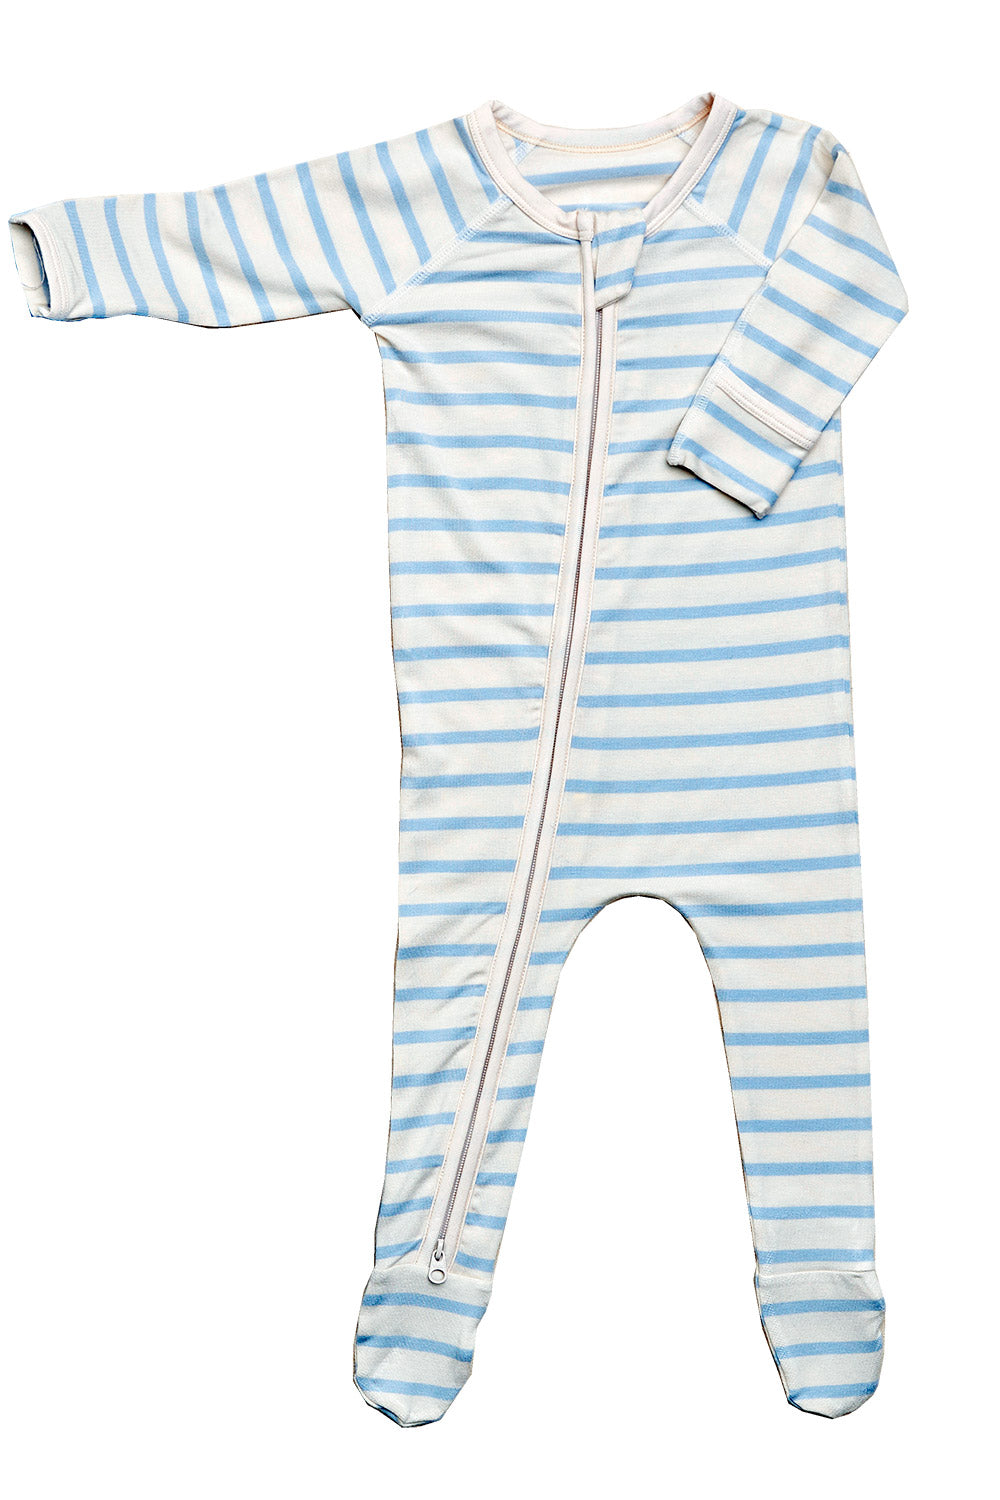 Boody Bamboo Striped Baby Onesie in White and Blue Flat Lay